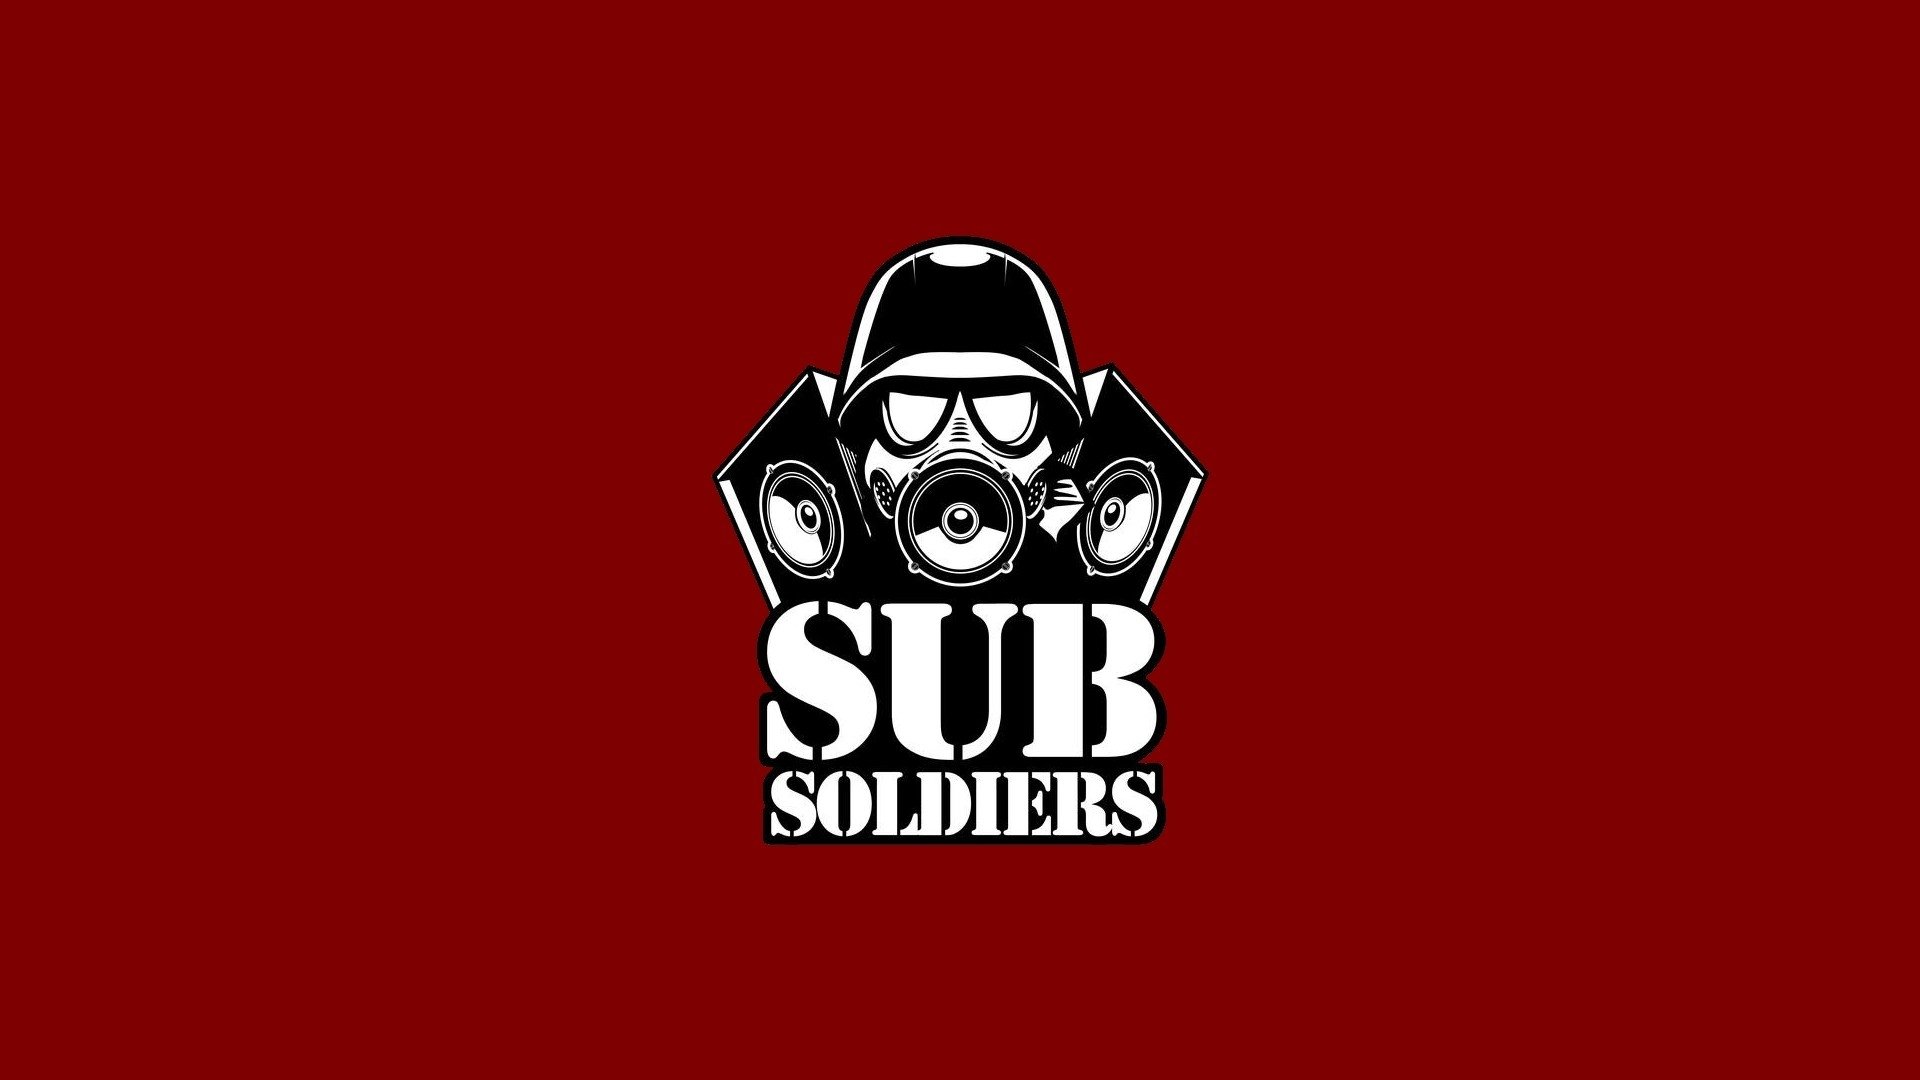 Images of Sub Soldiers | 1920x1080